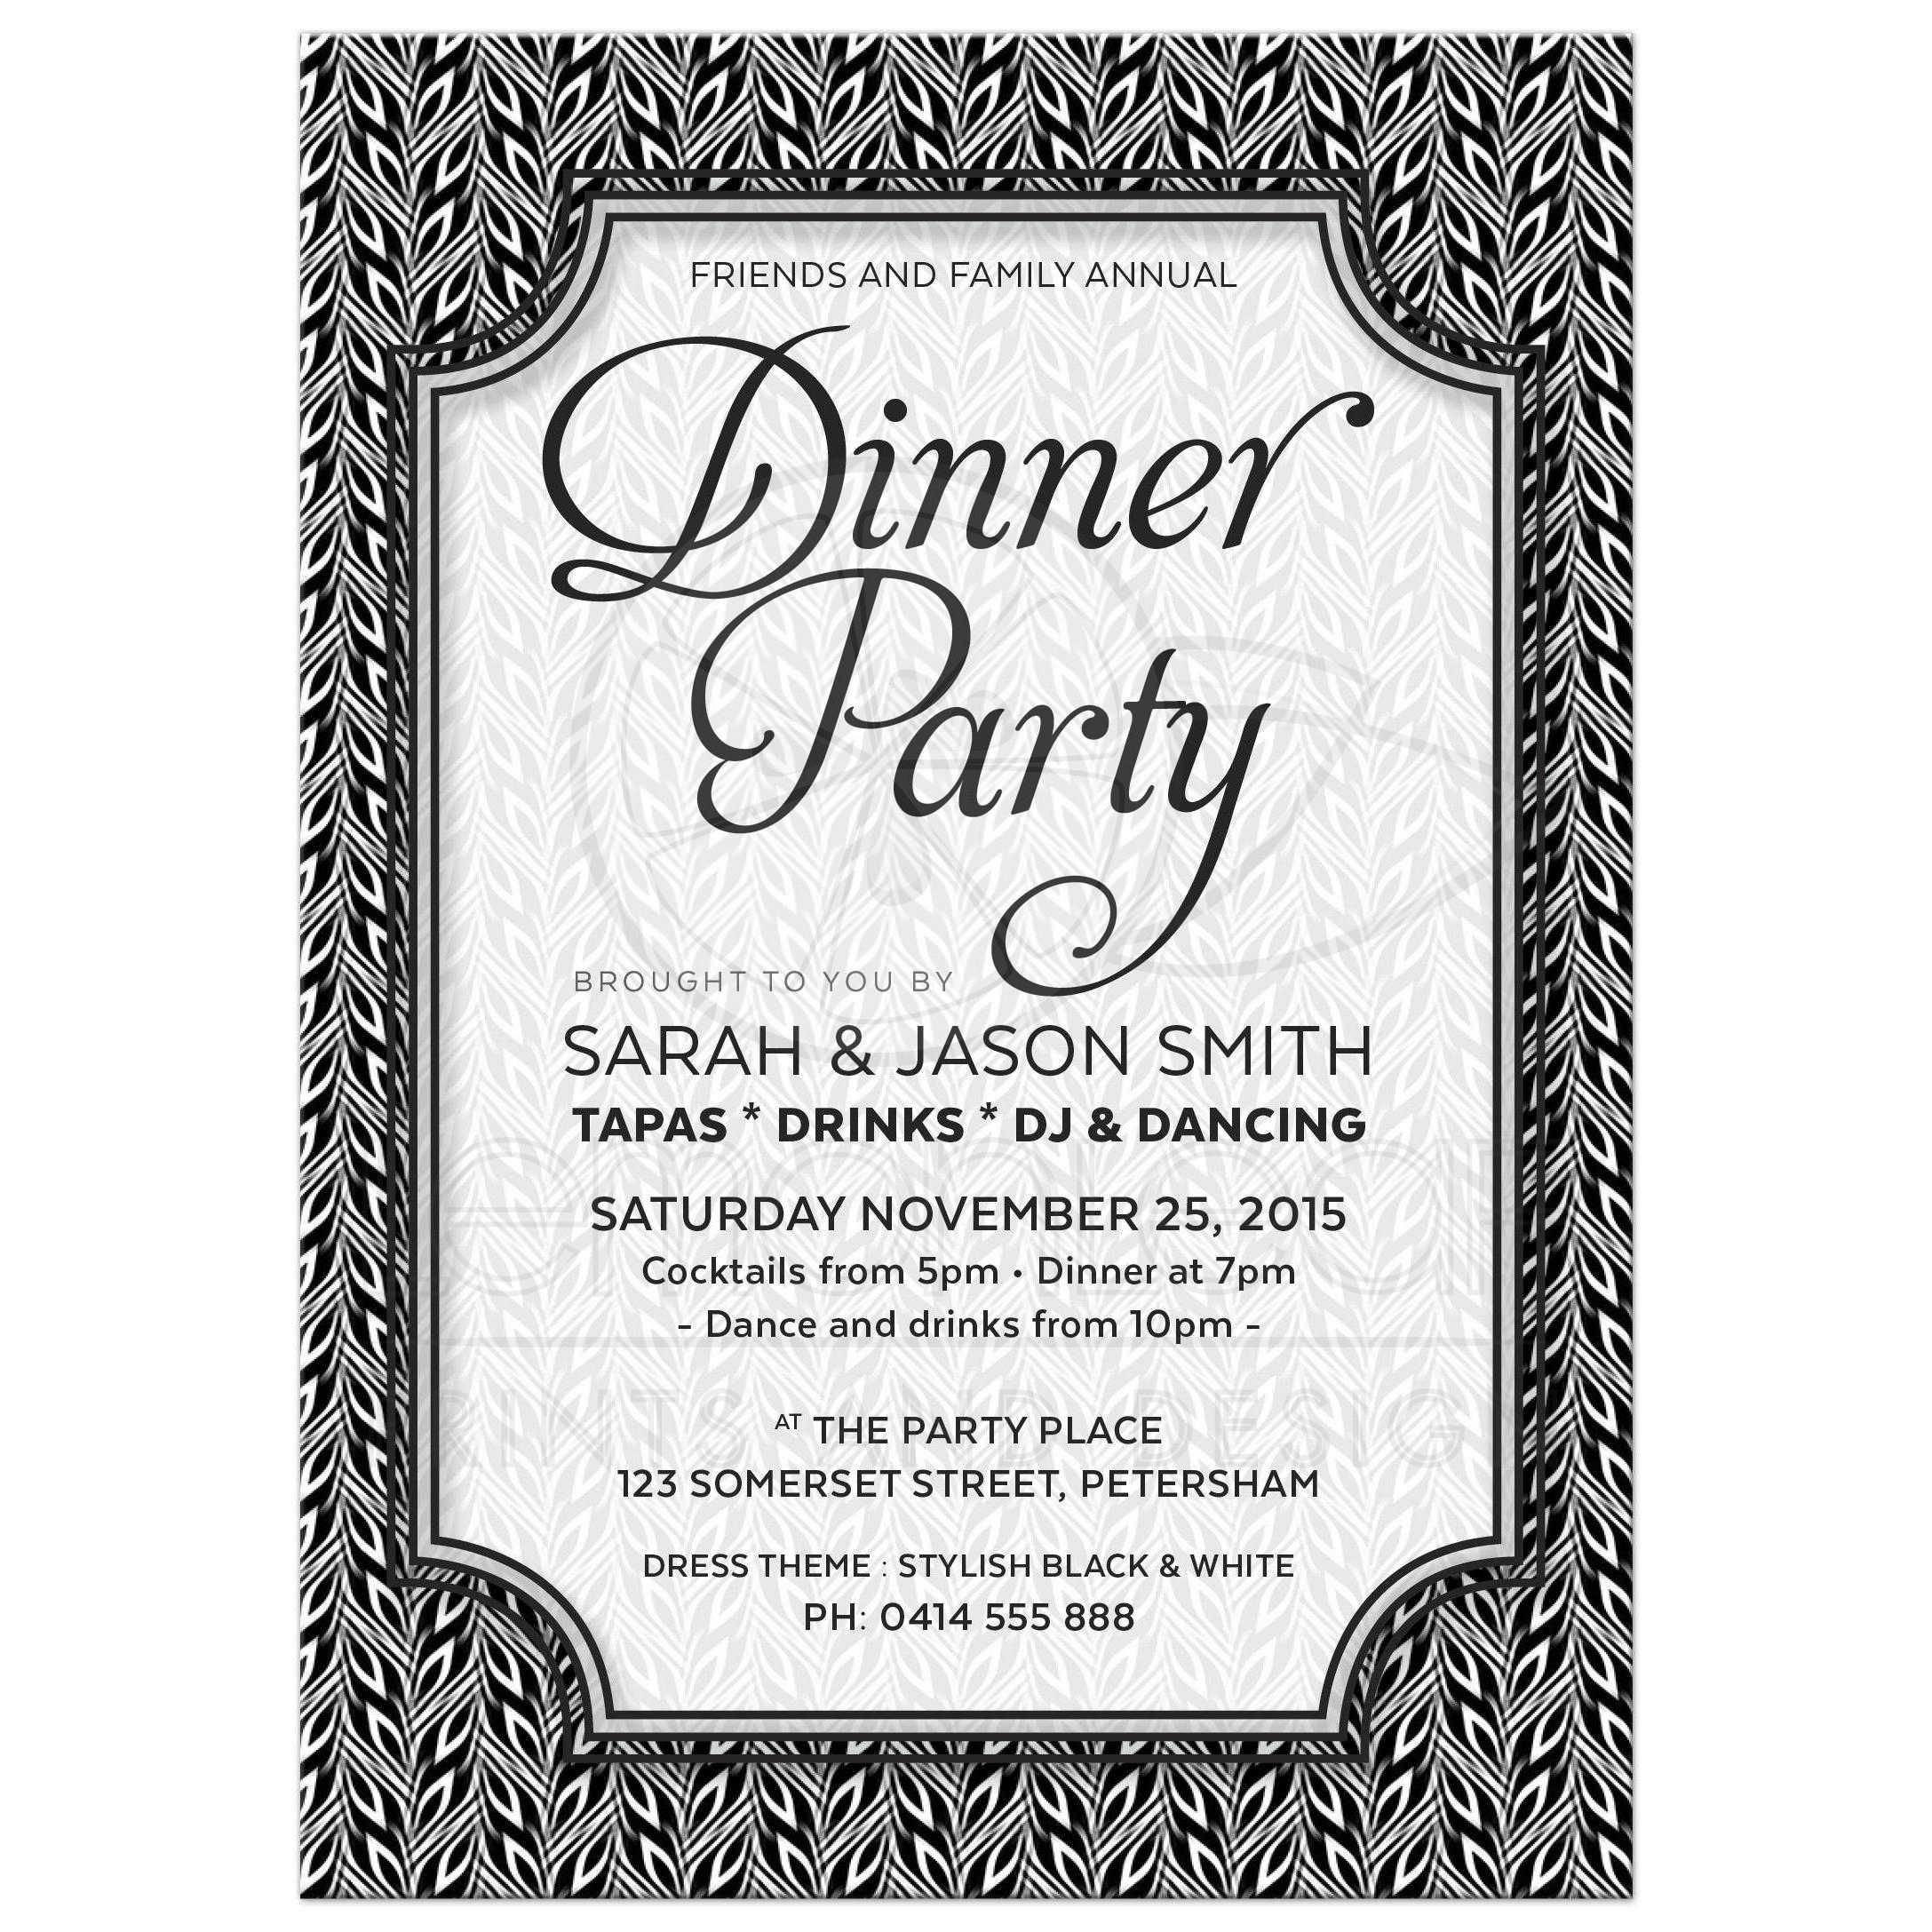 The Best Ideas for Dinner Party Invitation Ideas - Home, Family, Style